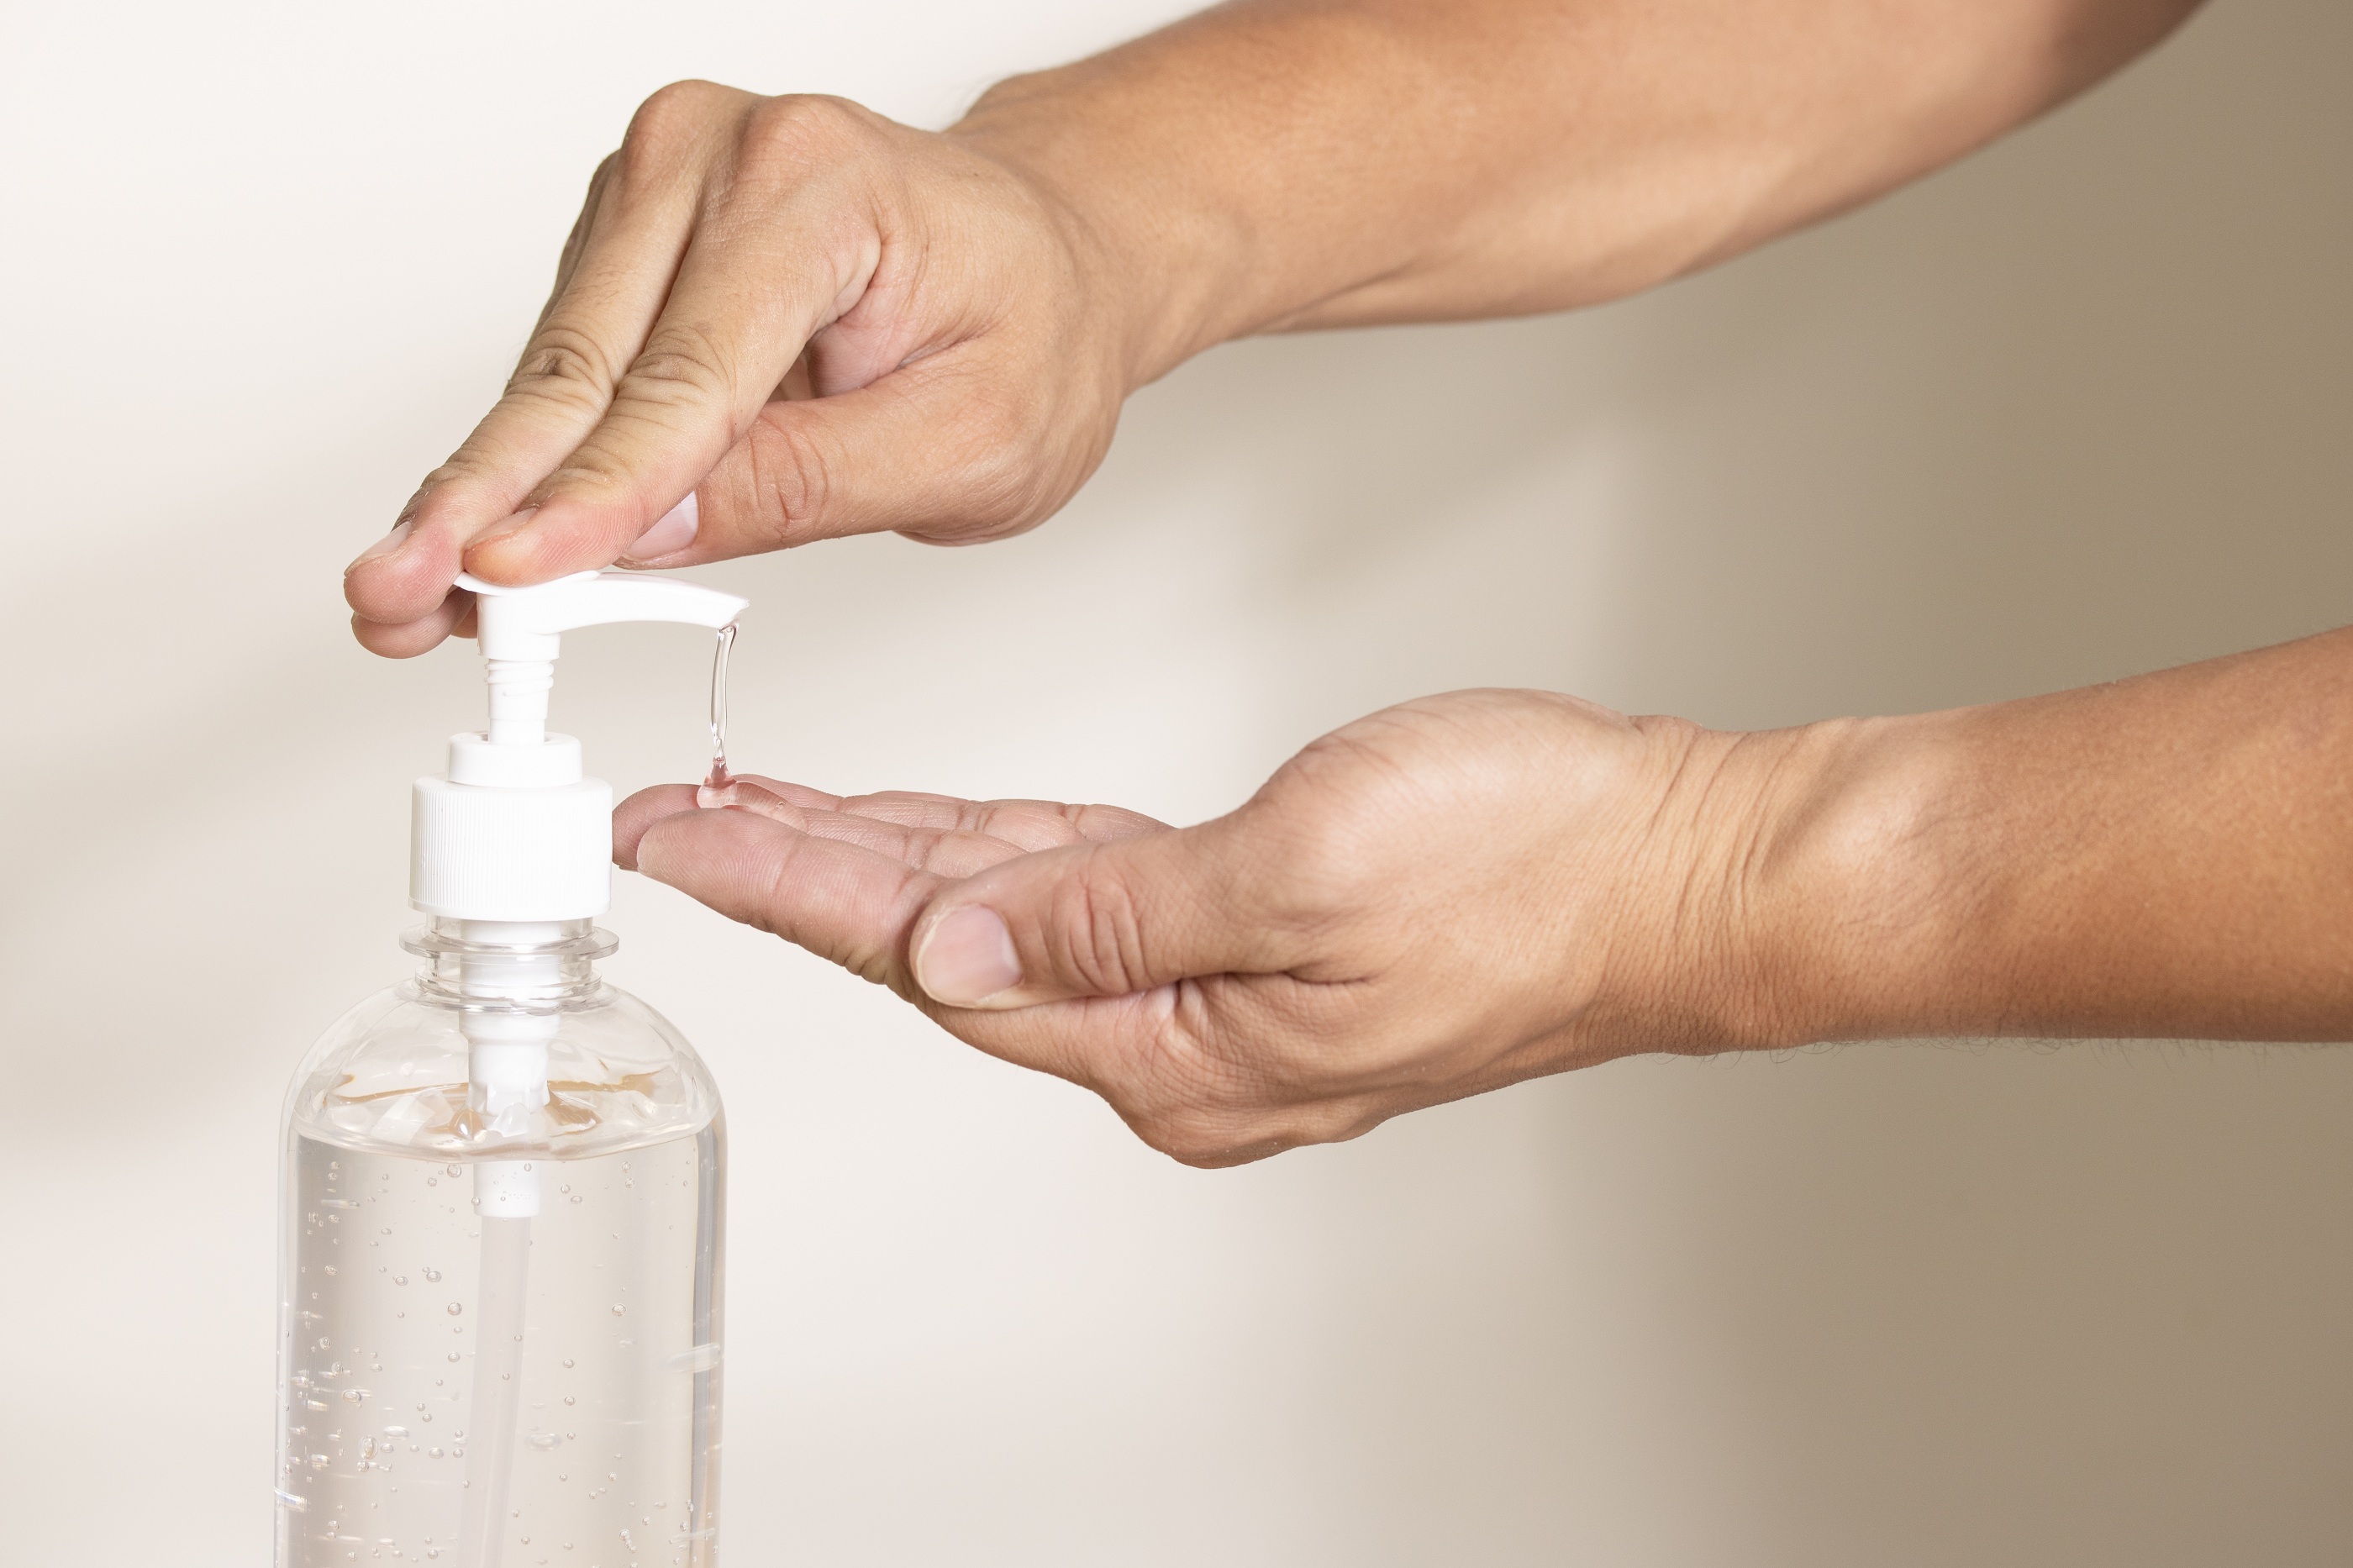 What's the difference between hand soap and hand wash? – WØRKS